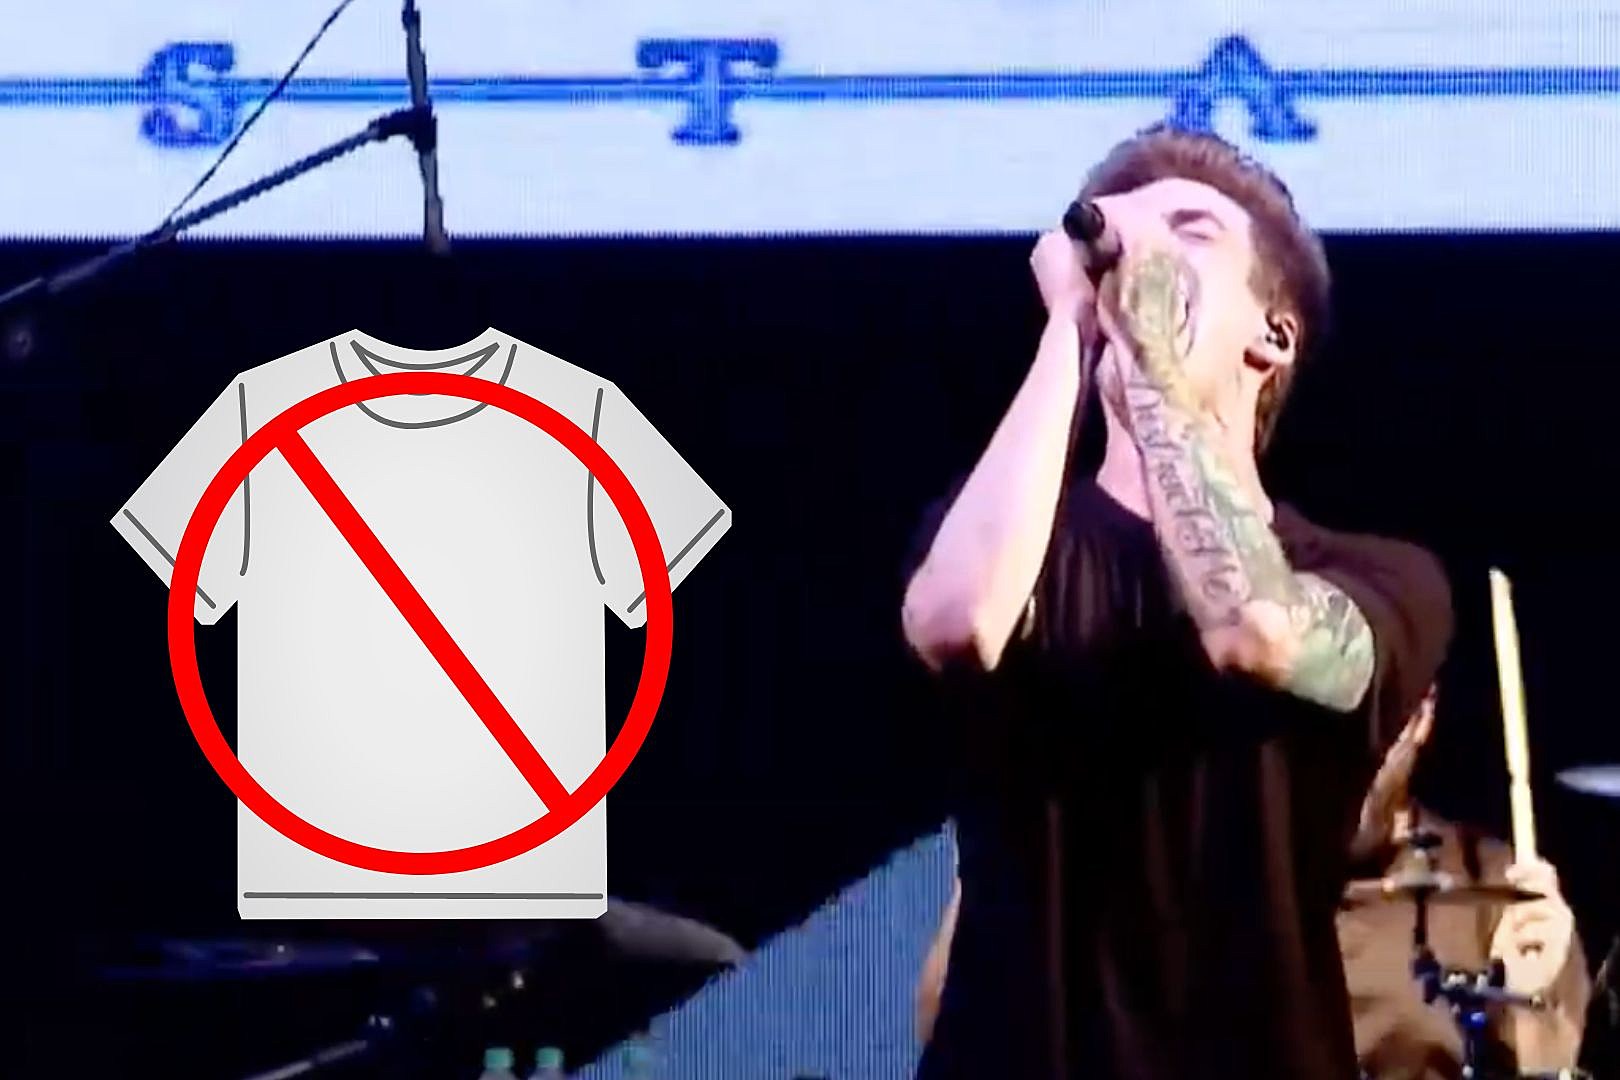 Monuments Protest Venue Merch Cuts By Refusing to Sell Anything